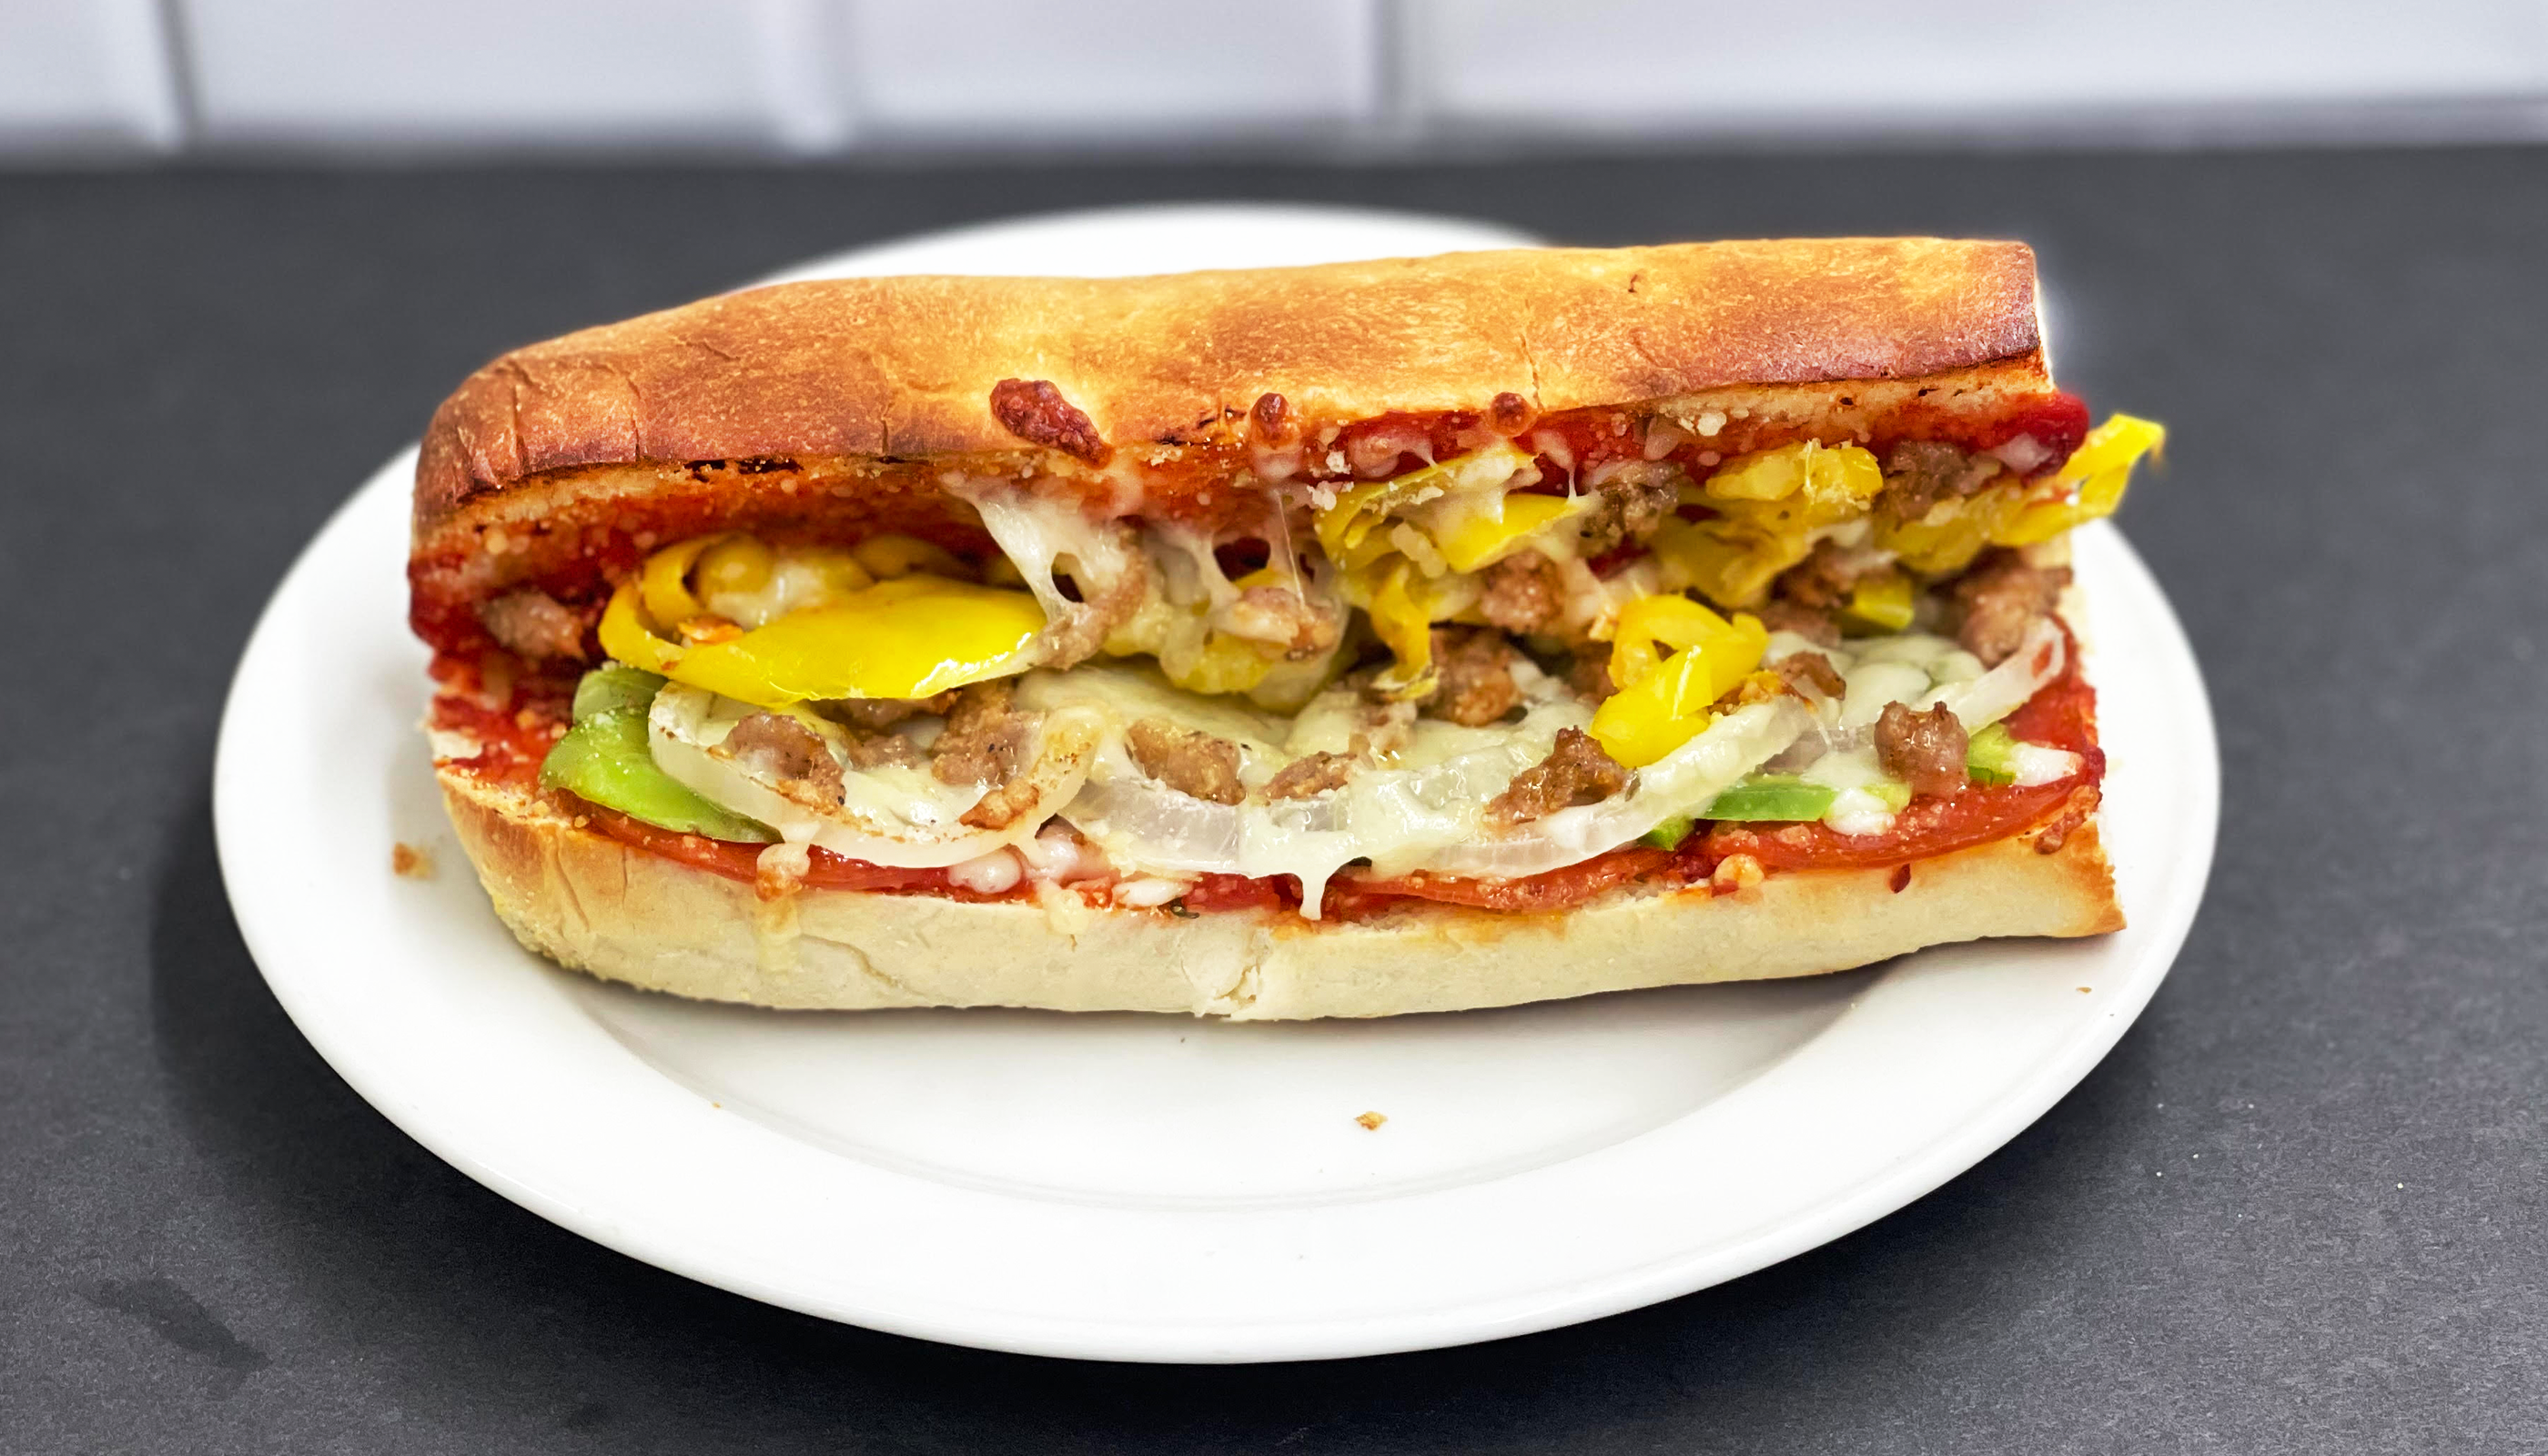 If you love the PJ Special Pizza, then this is the sandwich for you. Our tasty sub includes fresh hand-pulled sausage, onions, and green peppers for a one-of-a-kind flavor combination.